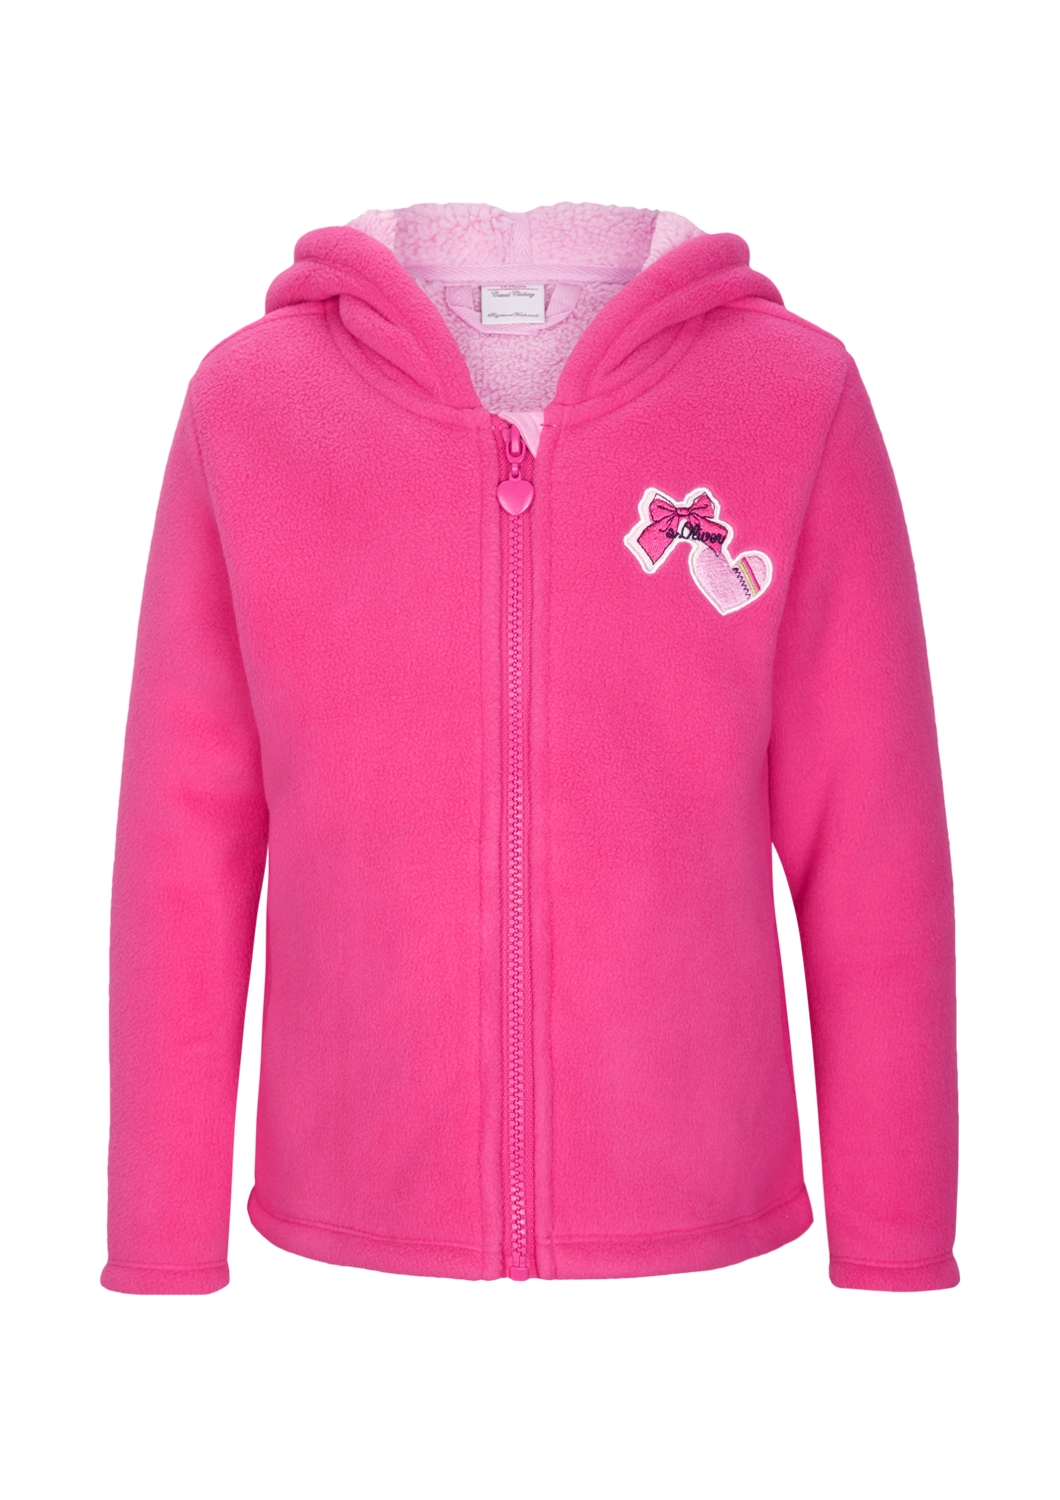 Kids girls (sizes 92-128): Order now in the s.Oliver online shop